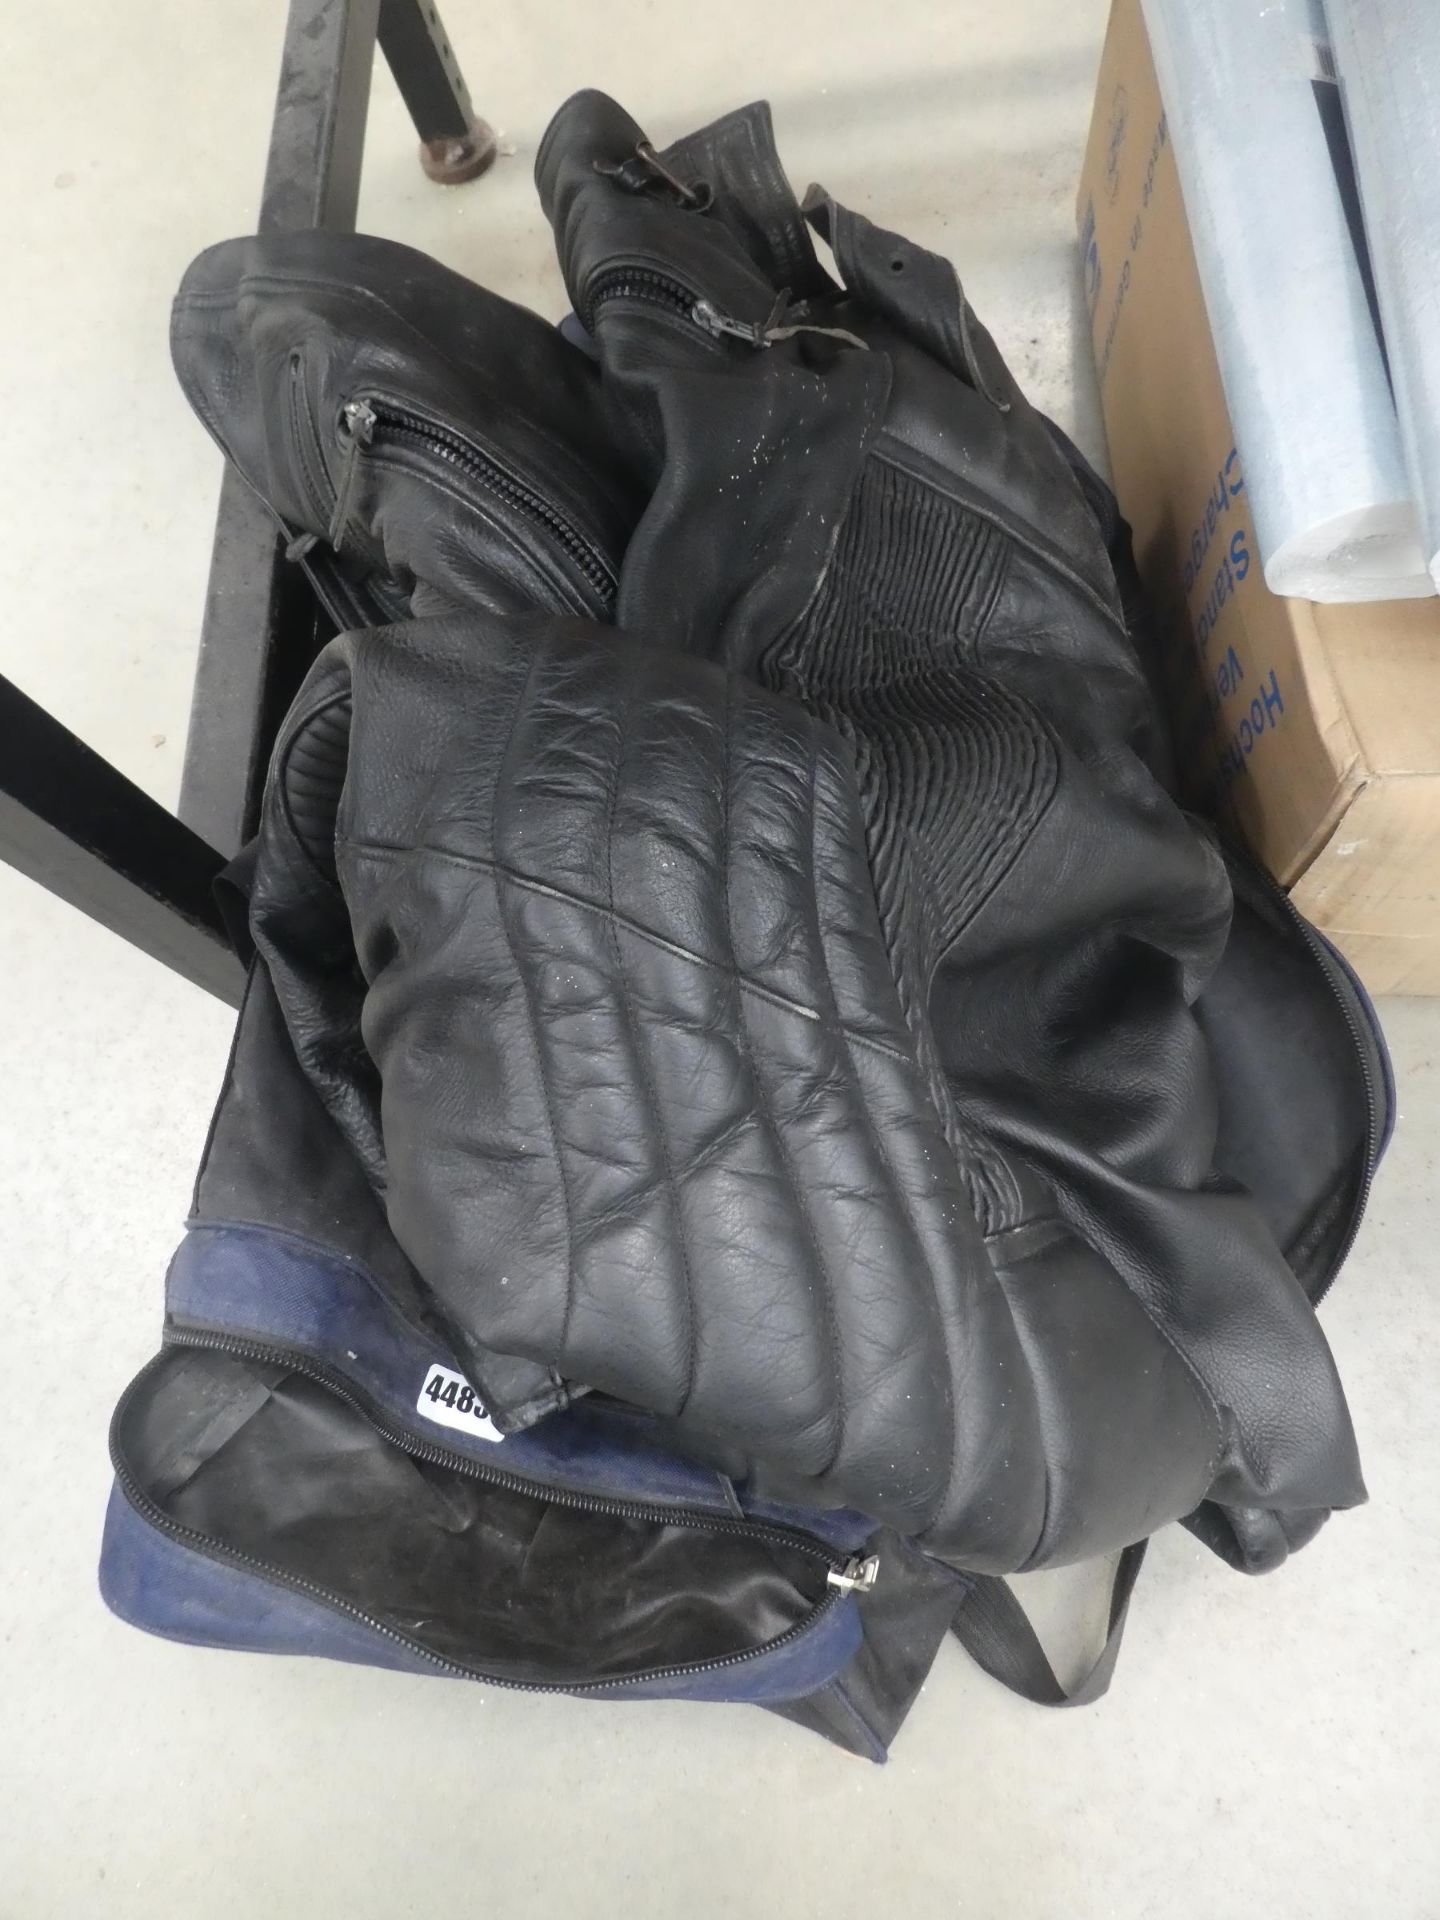 Bag containing motorcycle leathers